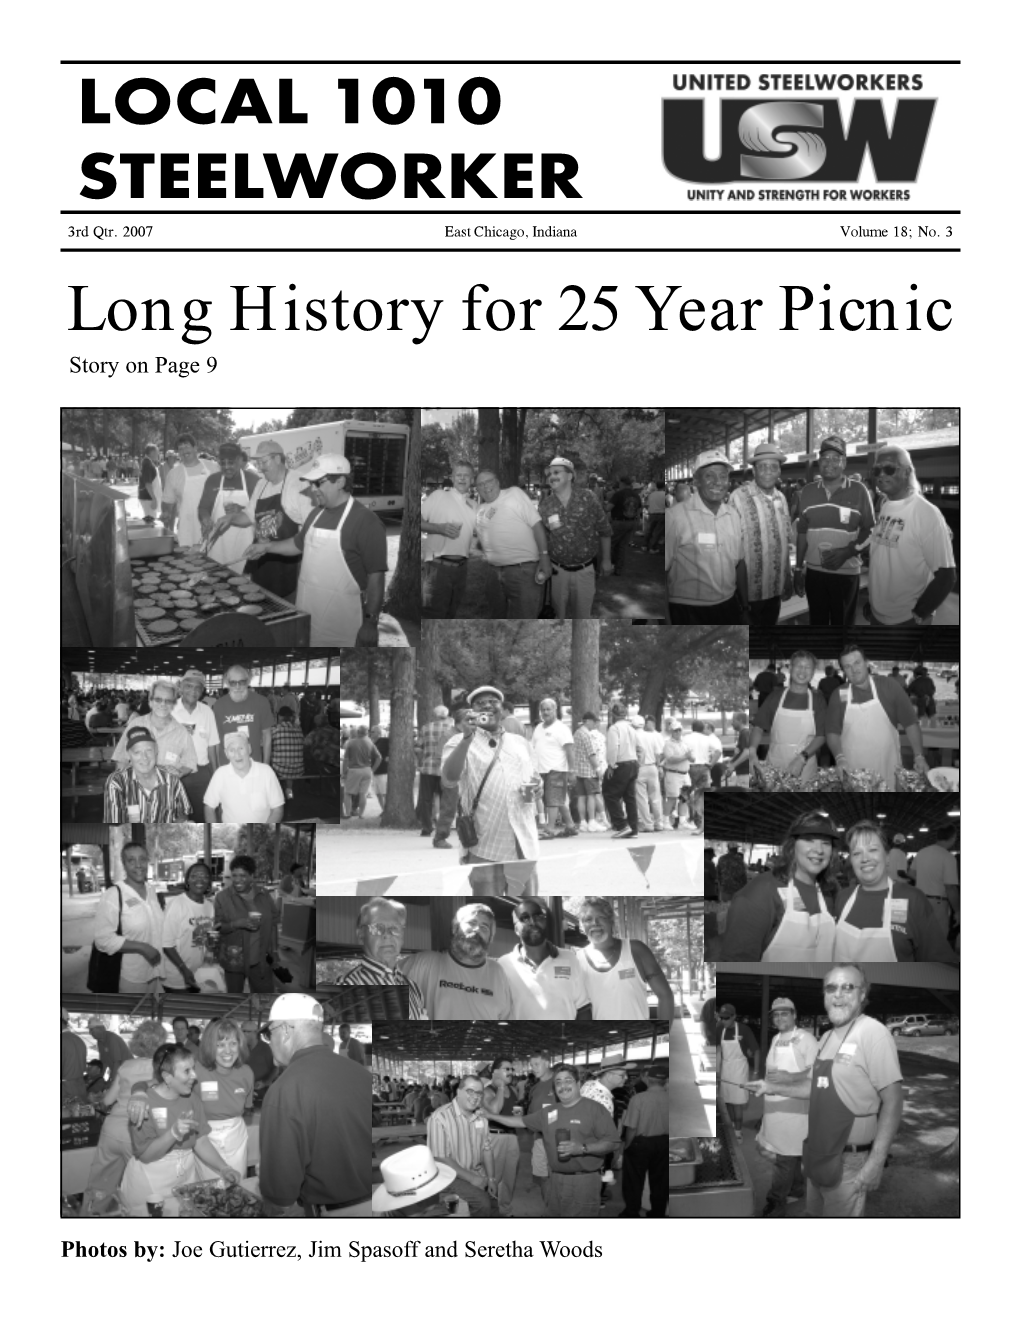 LOCAL 1010 STEELWORKER Long History for 25 Year Picnic